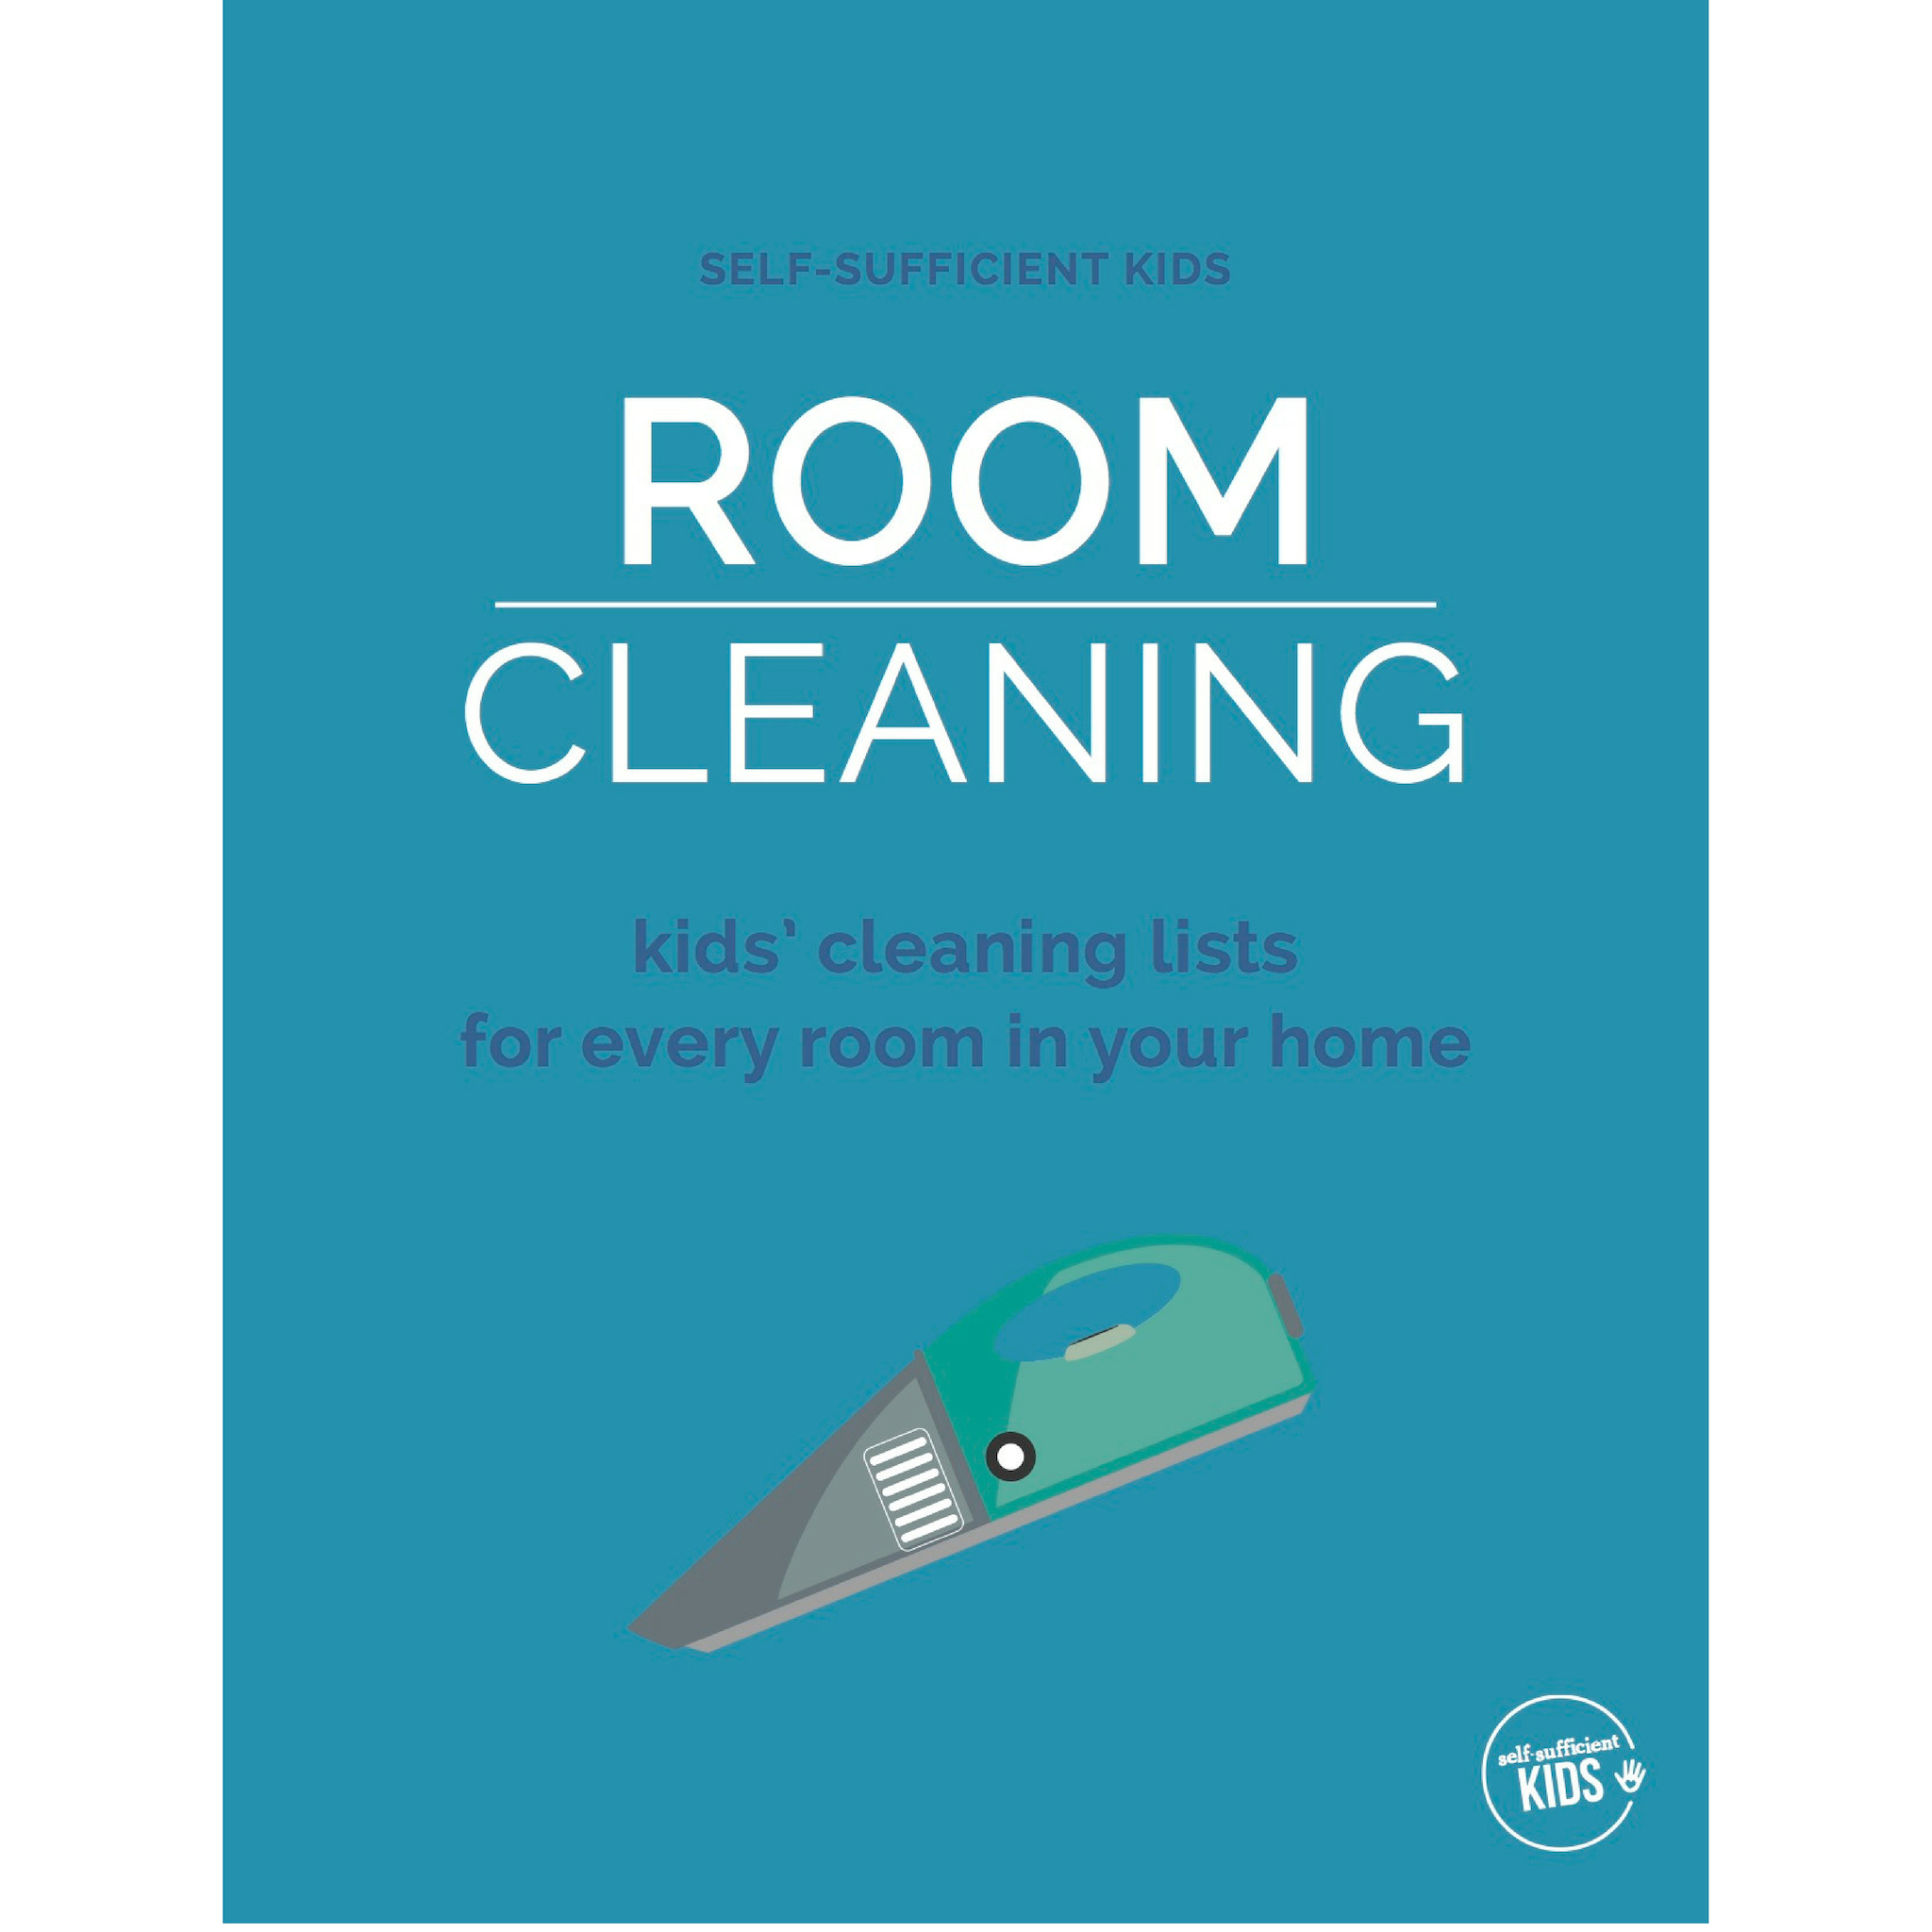 Room Cleaning Cards for Kids